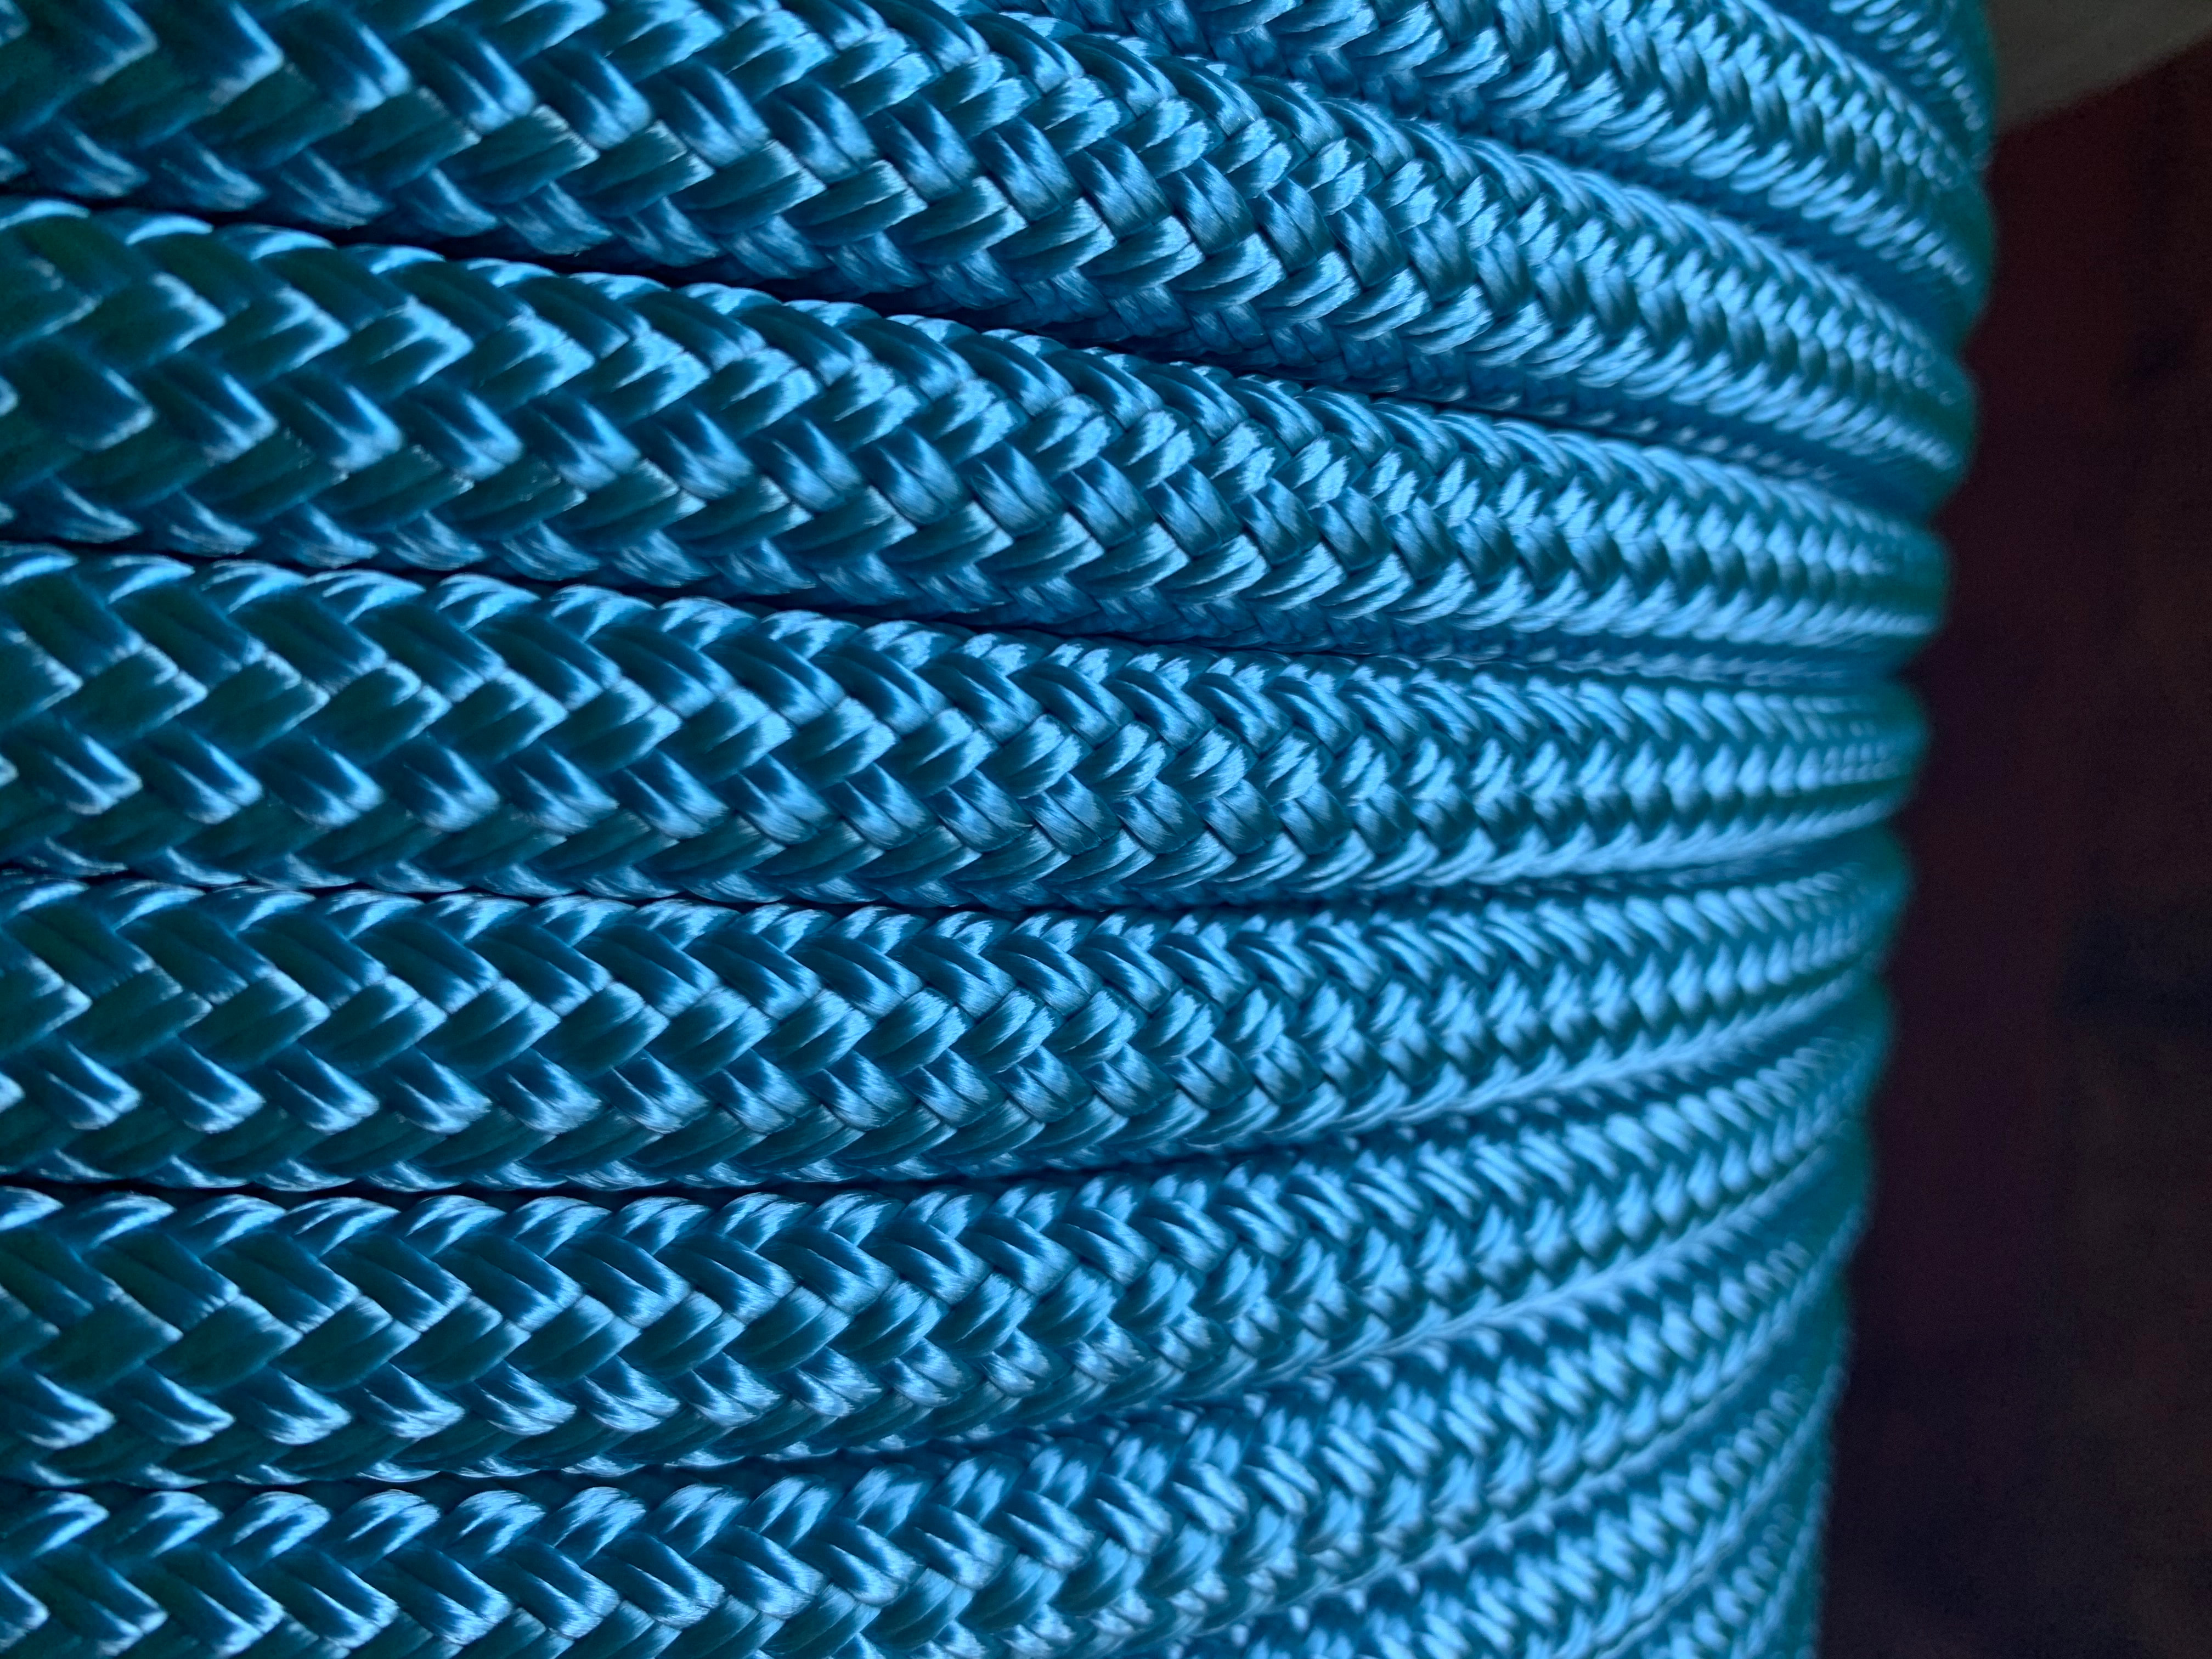 1/4 x 100 ft .Double Braid-Yacht Braid polyester rope.White/blue/black 